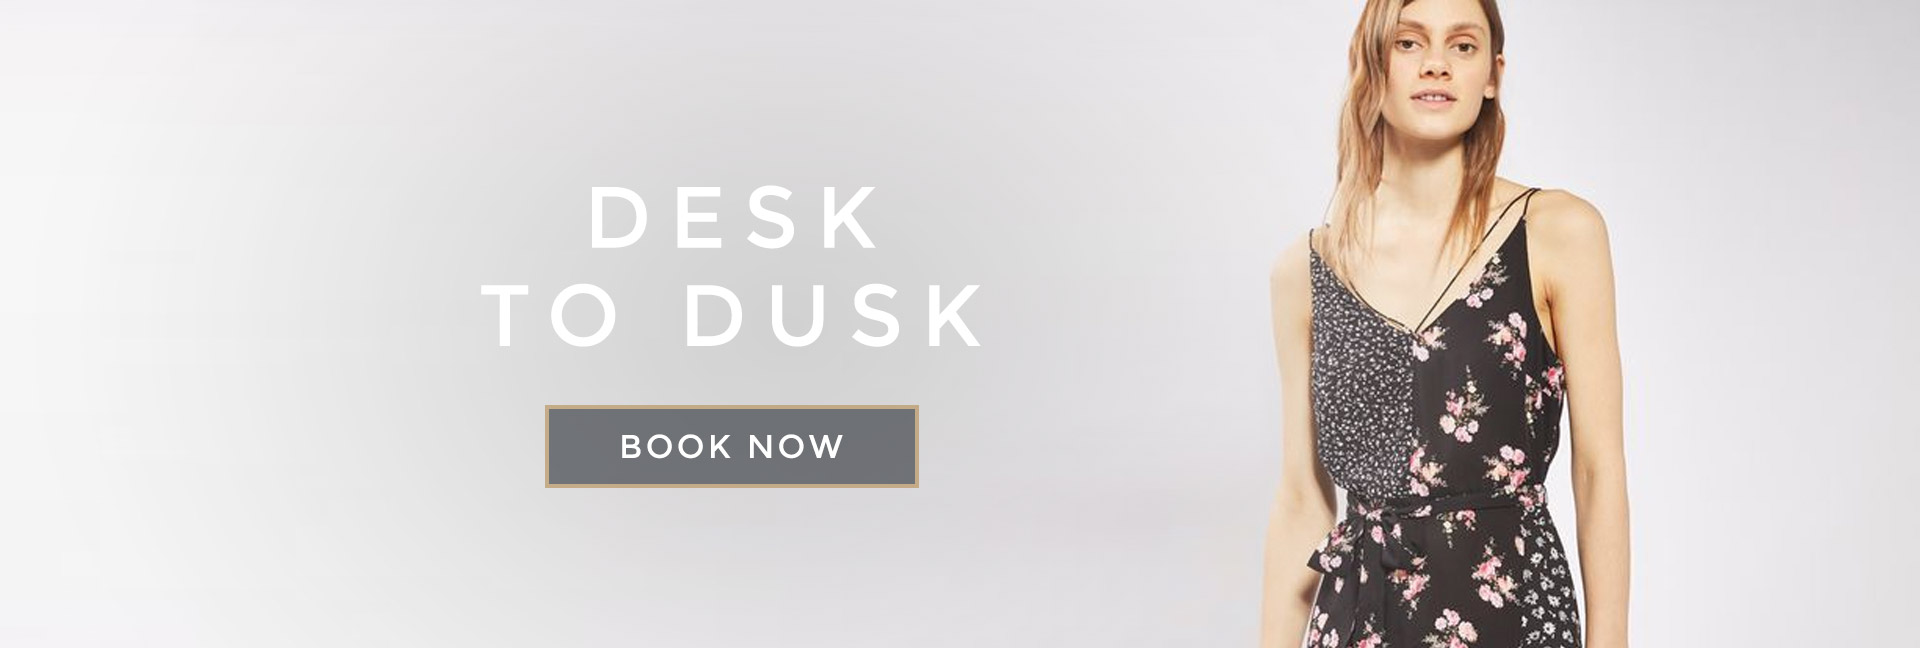 Desk to Dusk at All Bar One Harrogate - Book your table